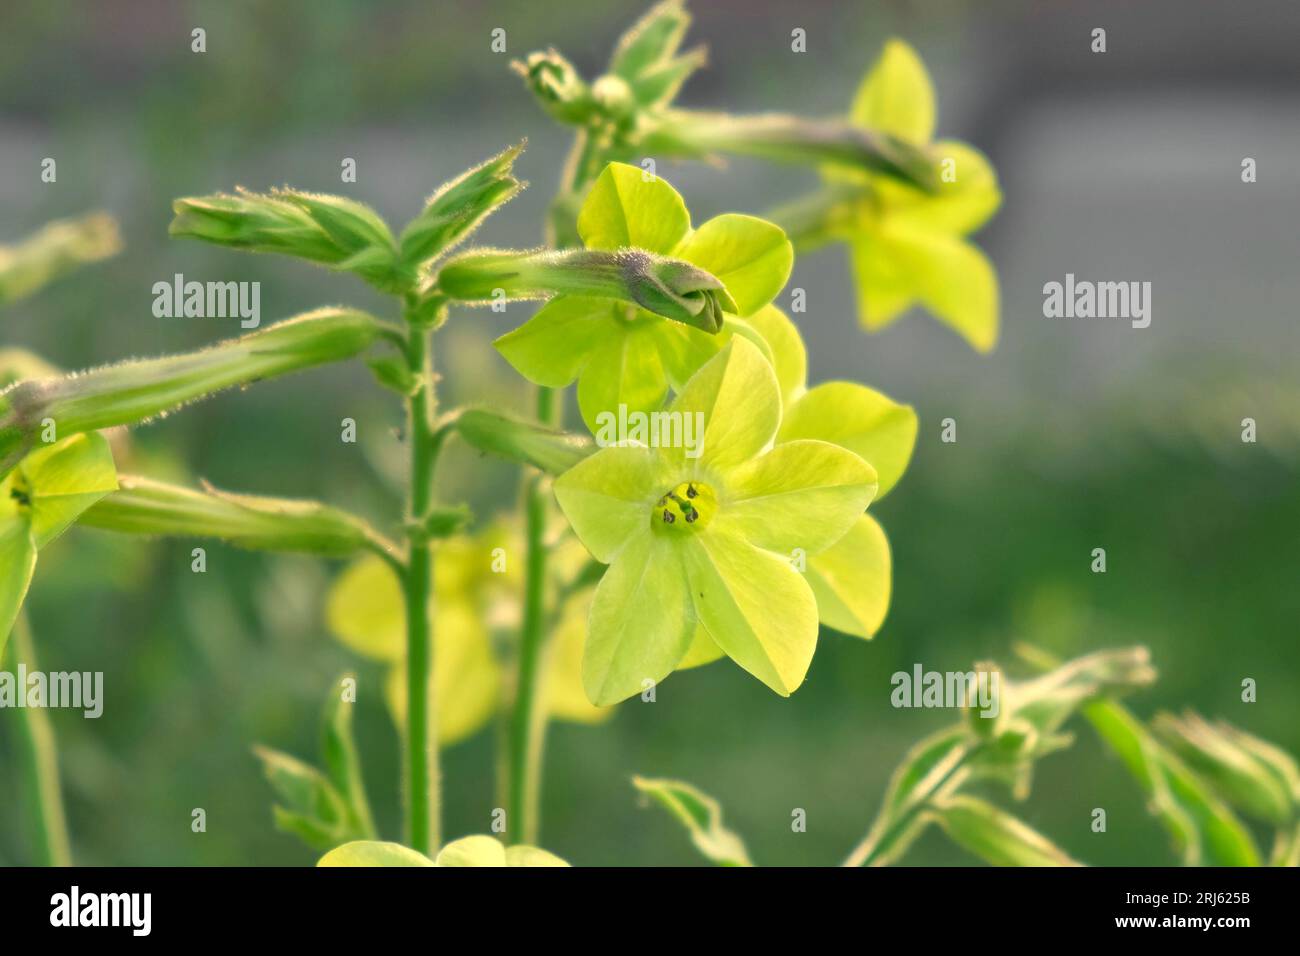 Nicotiana sanderae Lime Flower growing in the Garden. Fragrant Nicotiana alata Blooming. Jasmine, sweet, winged tobacco, tanbaku Persian Blossoming. L Stock Photo